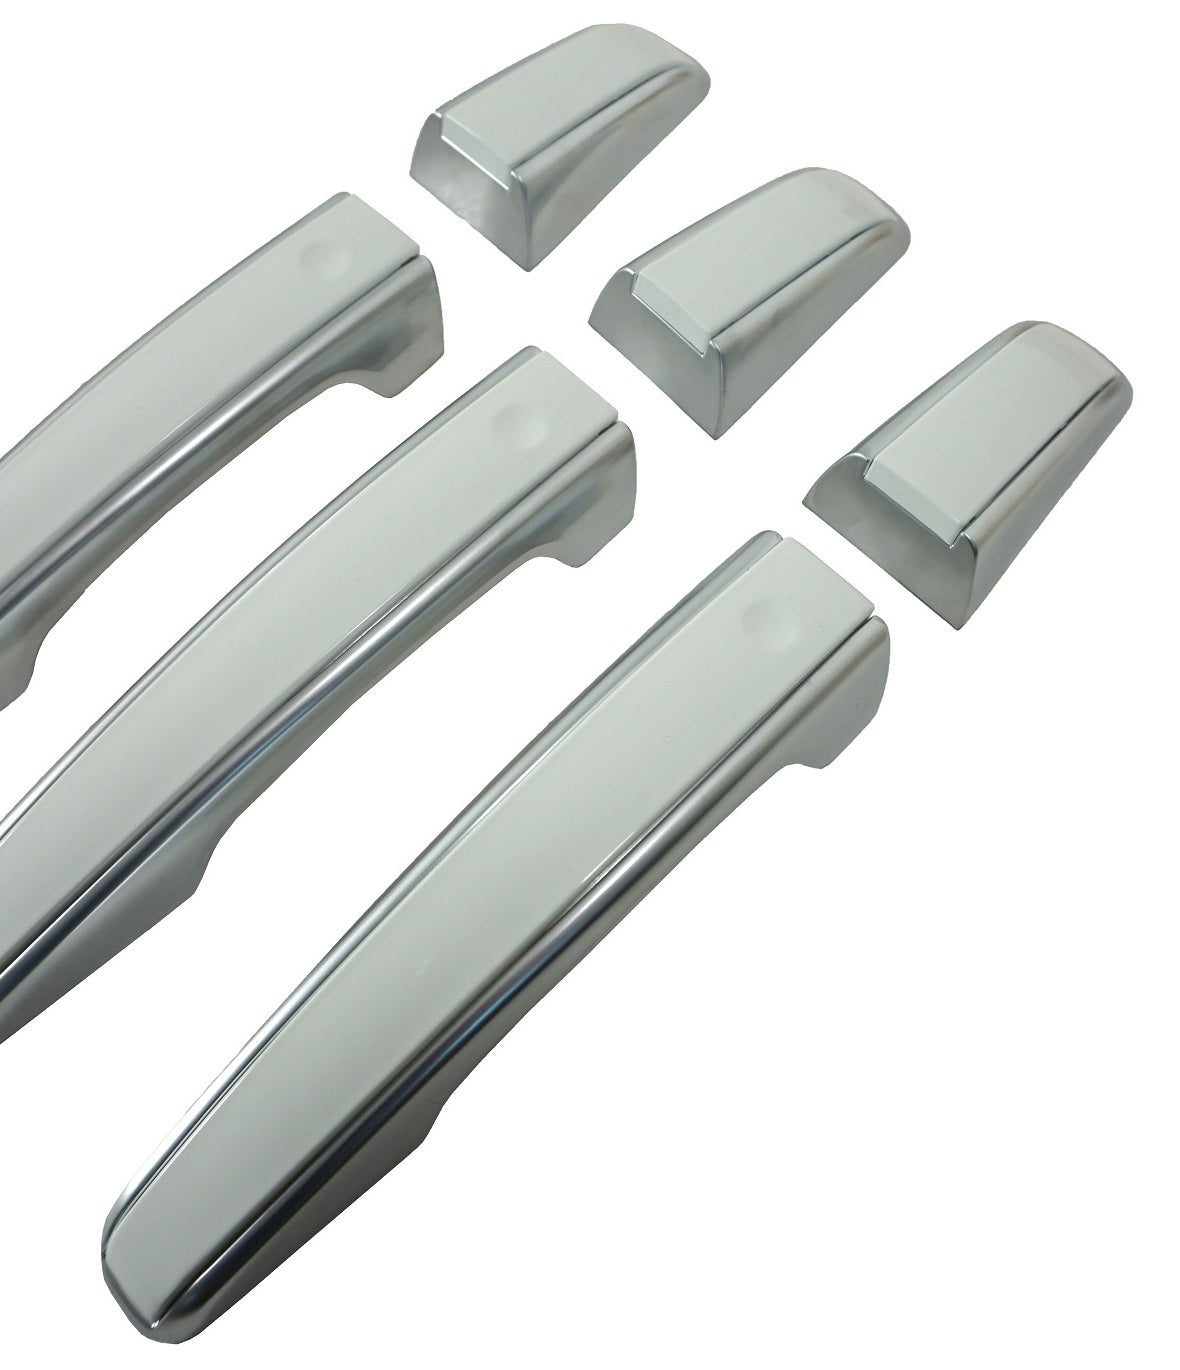 'Autobiography Style' Door Handles Skins in Silver & White for Range Rover L405